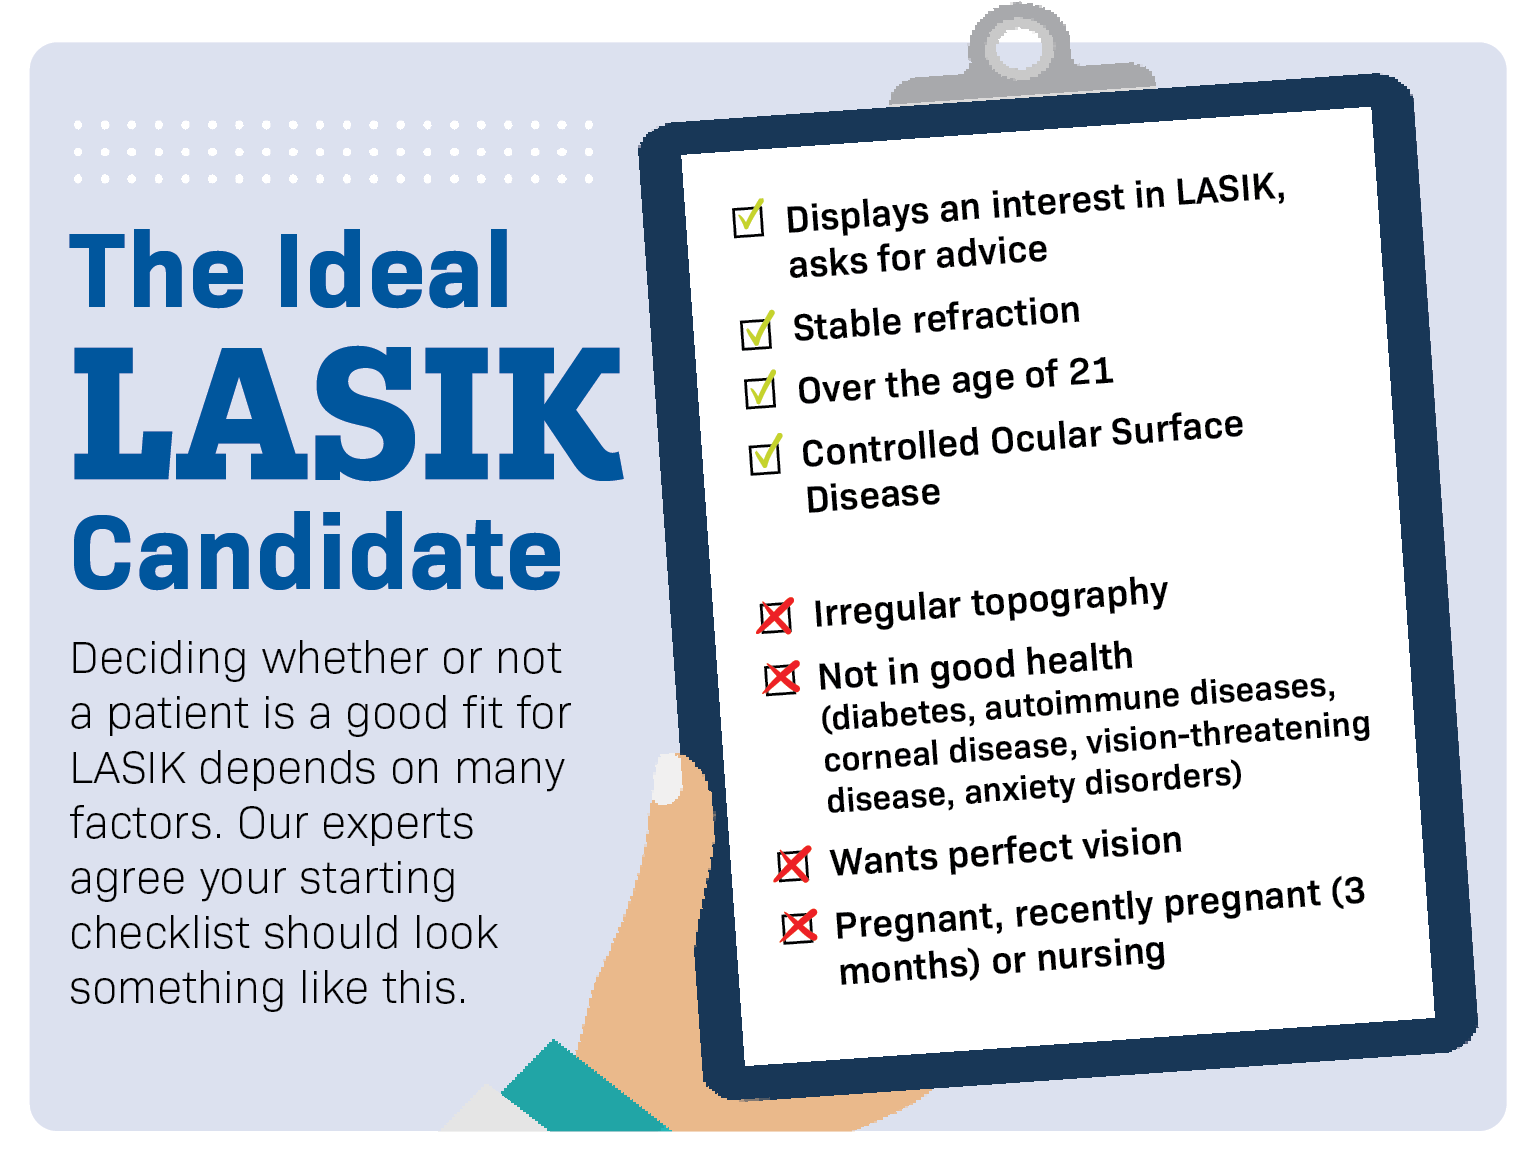 The ideal LASIK candidate